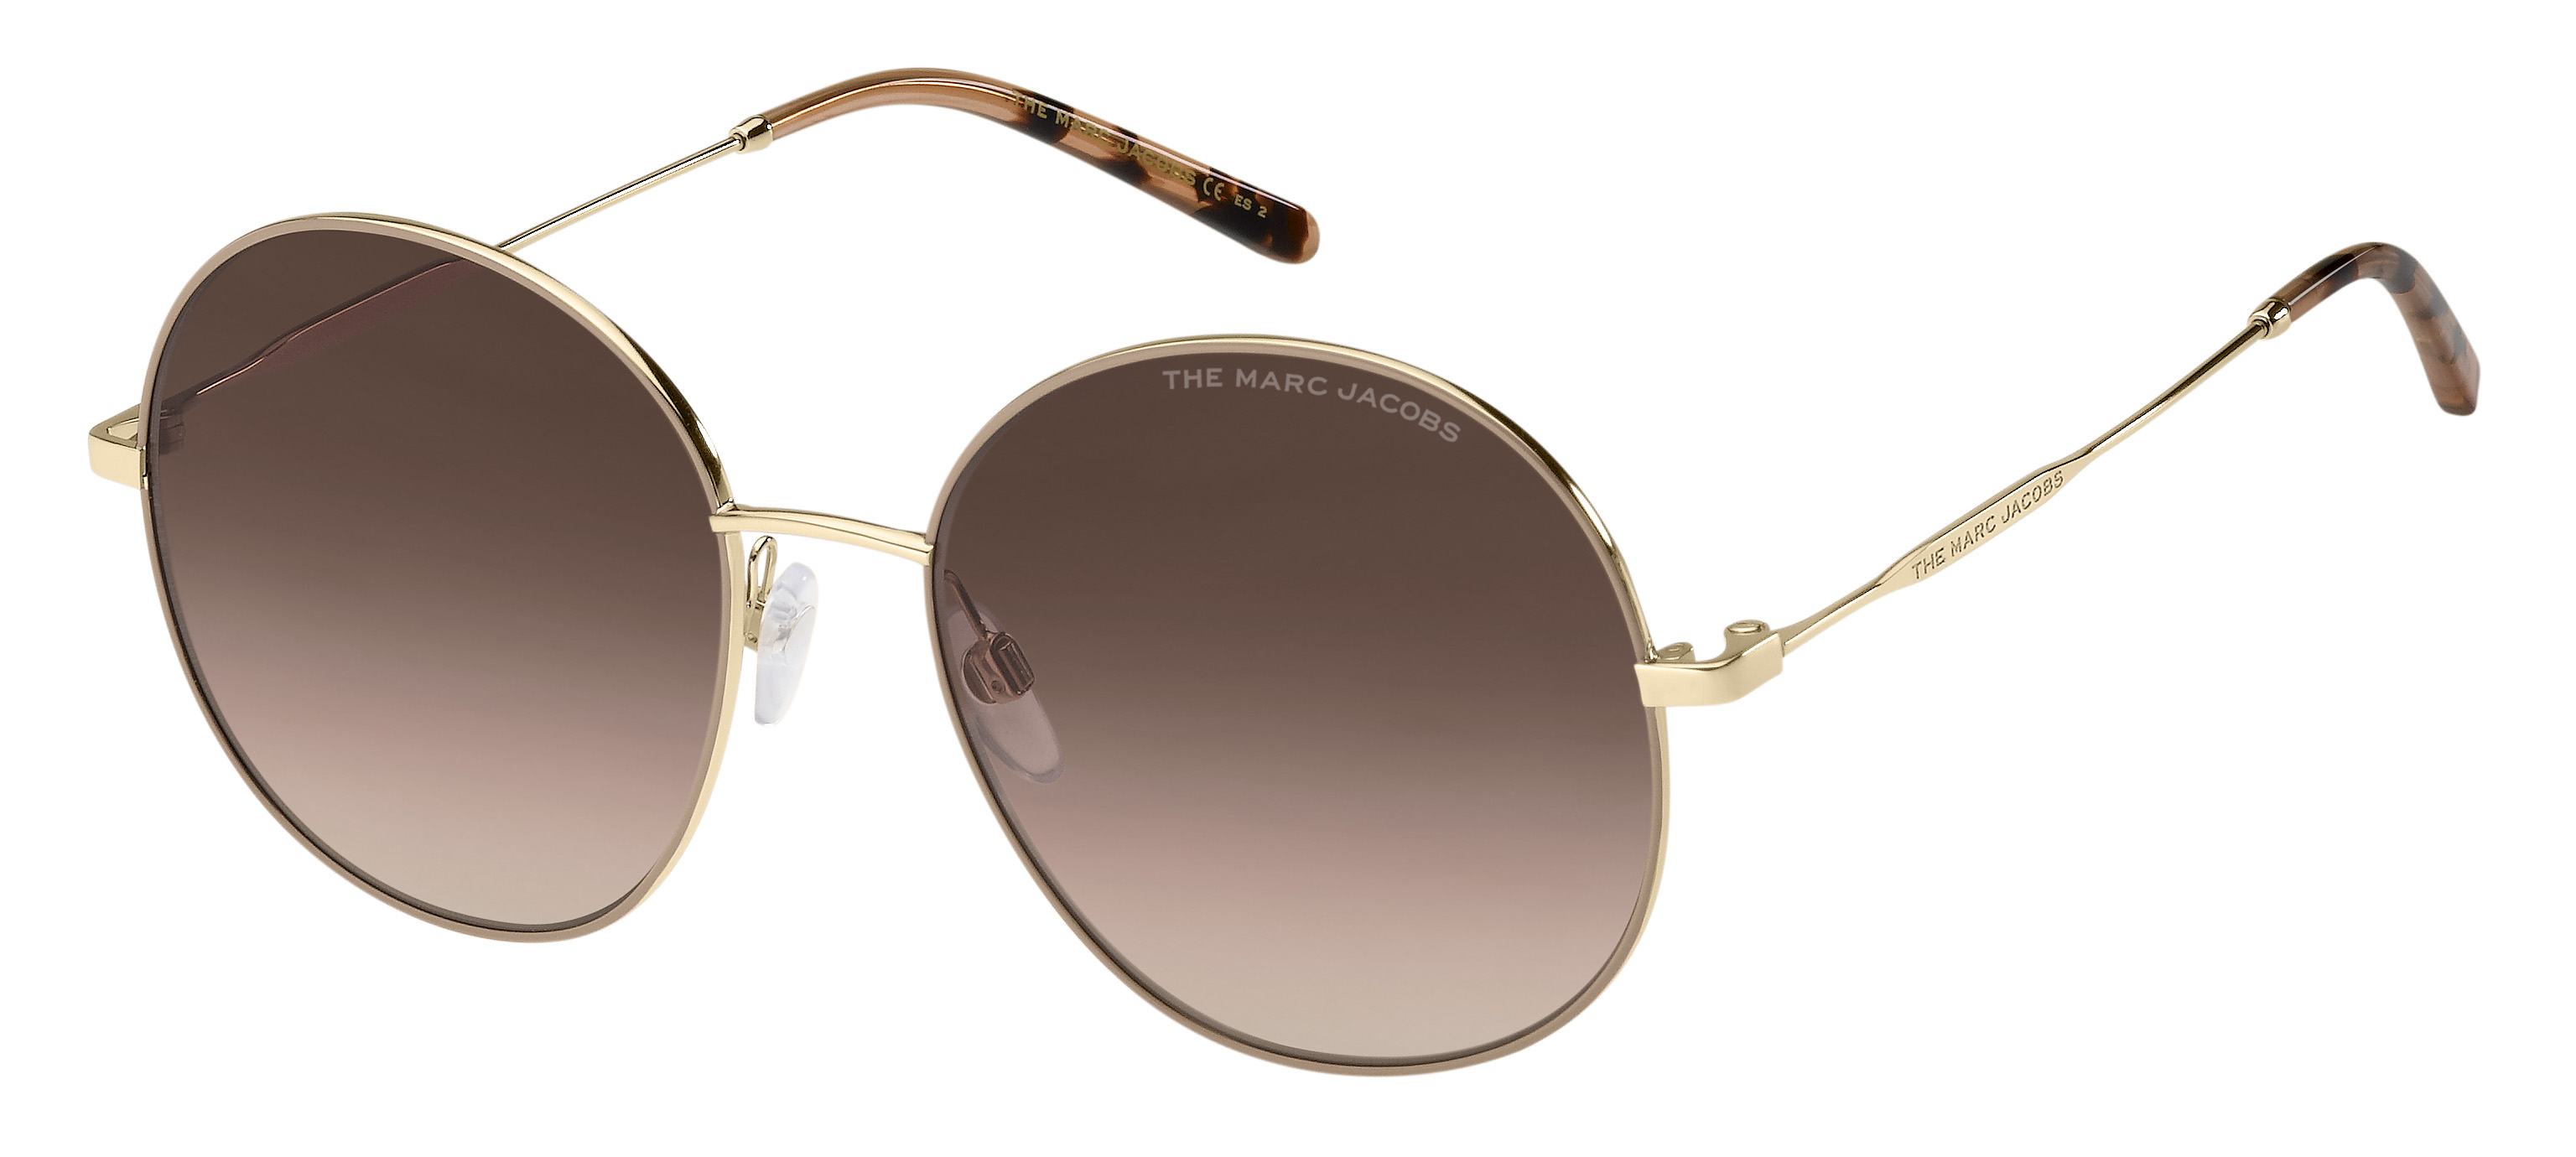 Marc Jacobs 620/S GOLD NUDE